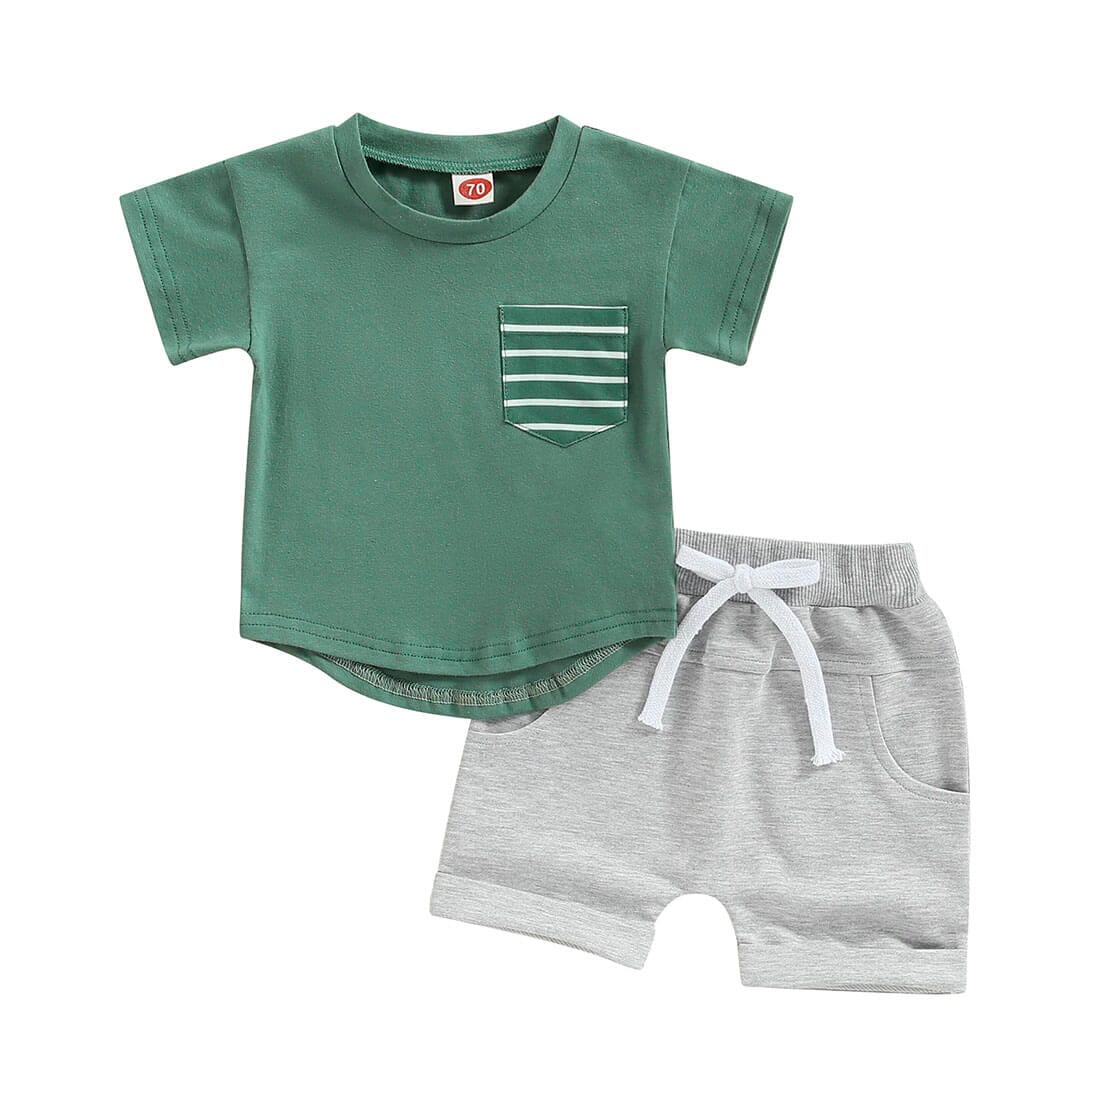 Striped Pocket Tee Solid Shorts Baby Set Green 3-6 M 